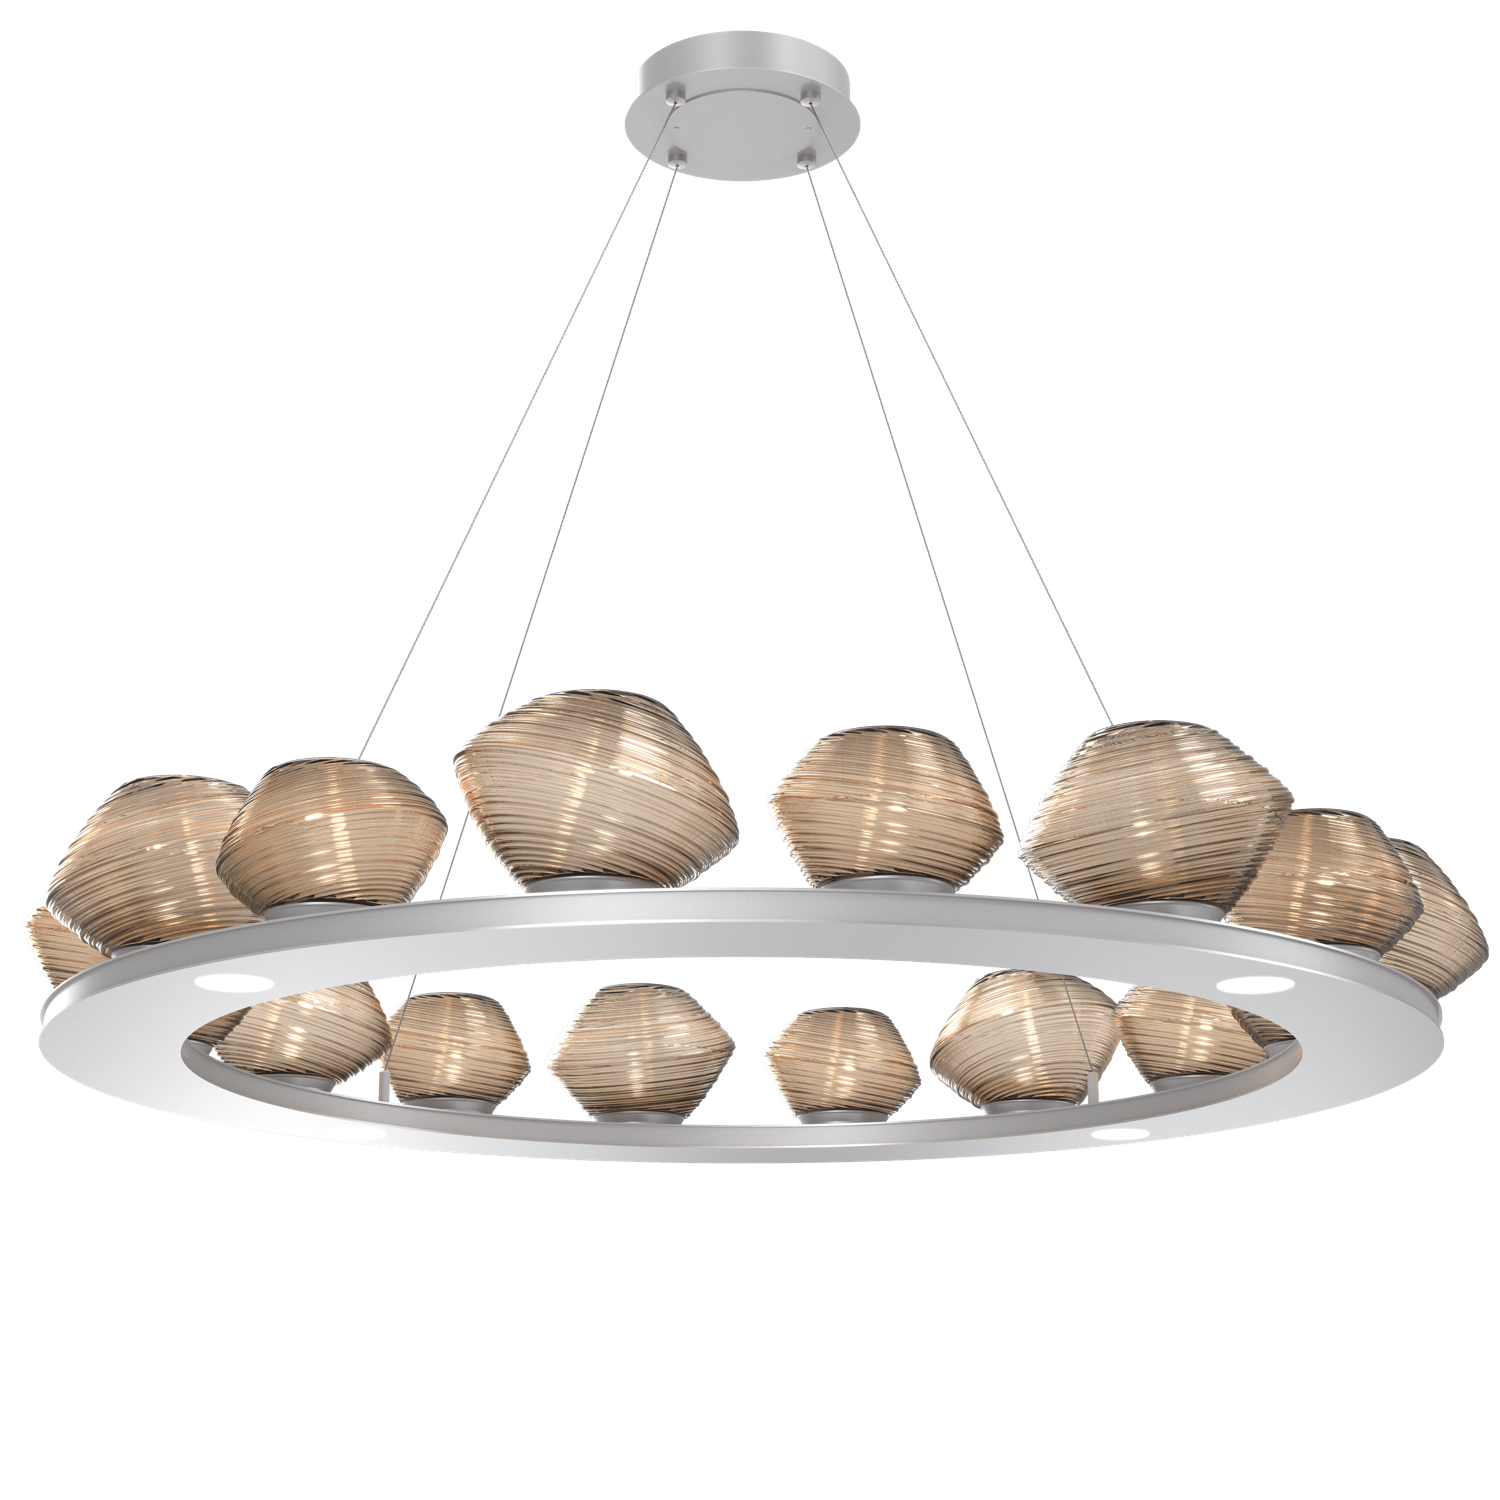 CHB0089-0D-CS-B-Hammerton-Studio-Mesa-48-inch-ring-chandelier-with-classic-silver-finish-and-bronze-blown-glass-shades-and-LED-lamping